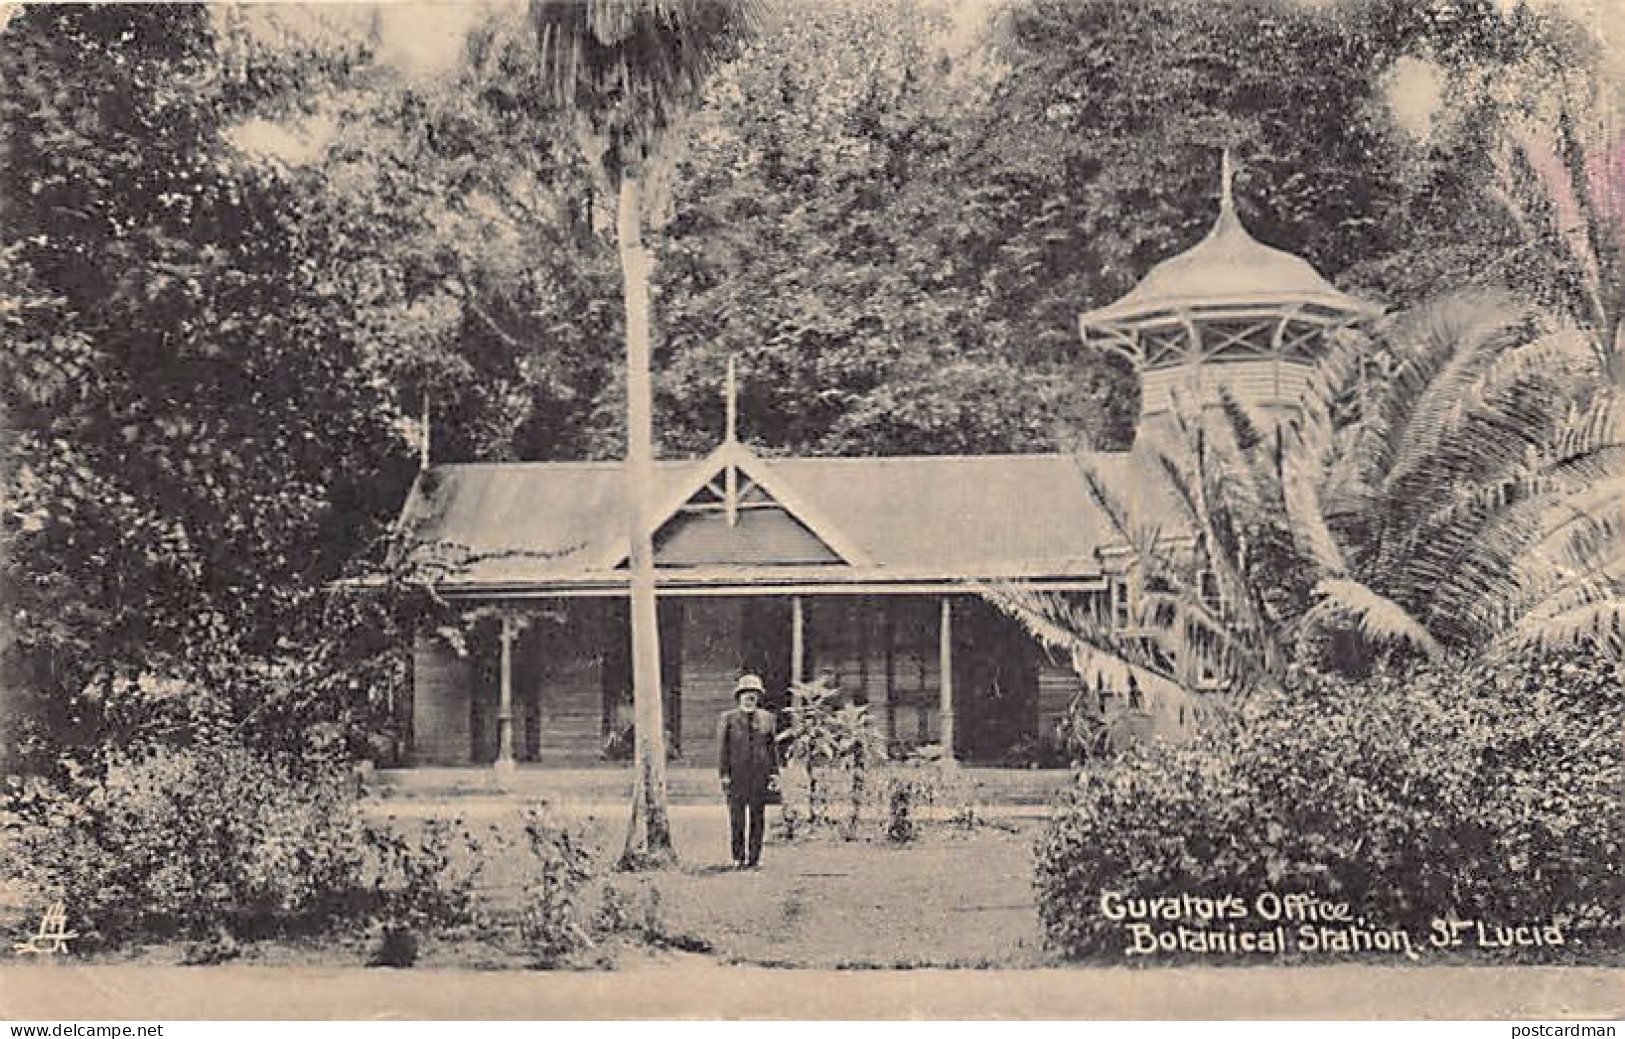 Saint Lucia - CASTRIES - Curator's Office, Botanical Garden - THE POSTCARD IS LIGHTLY UNSTICKED - Publ. Clarke & Co.  - St. Lucia